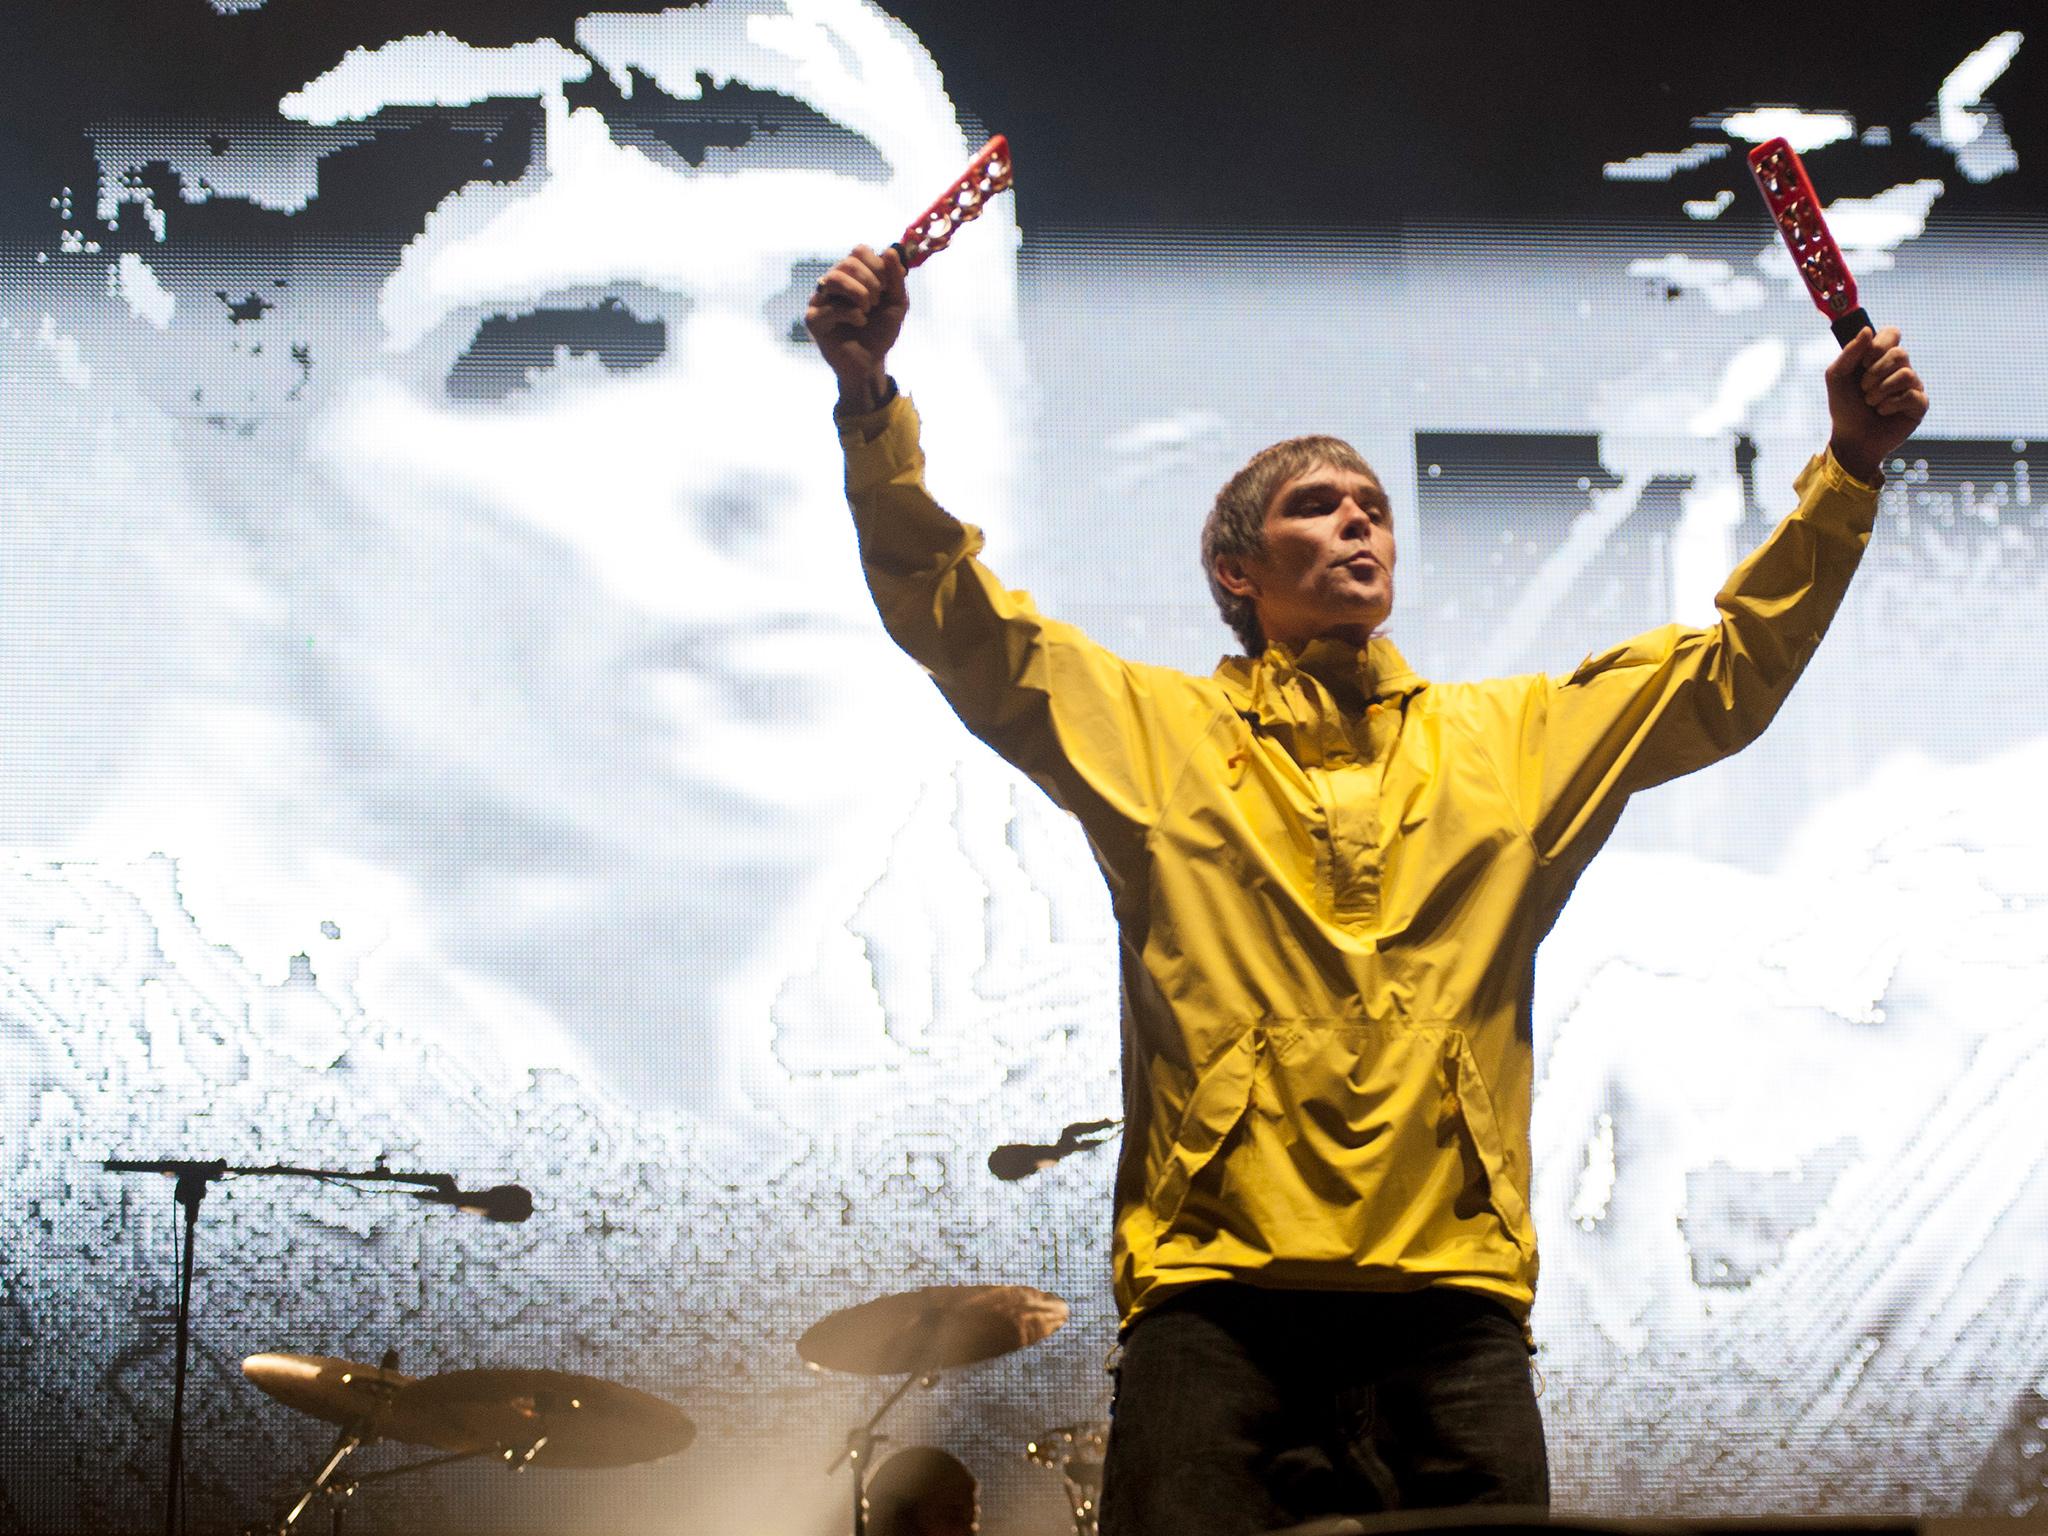 The Stone Roses' frontman Ian Brown